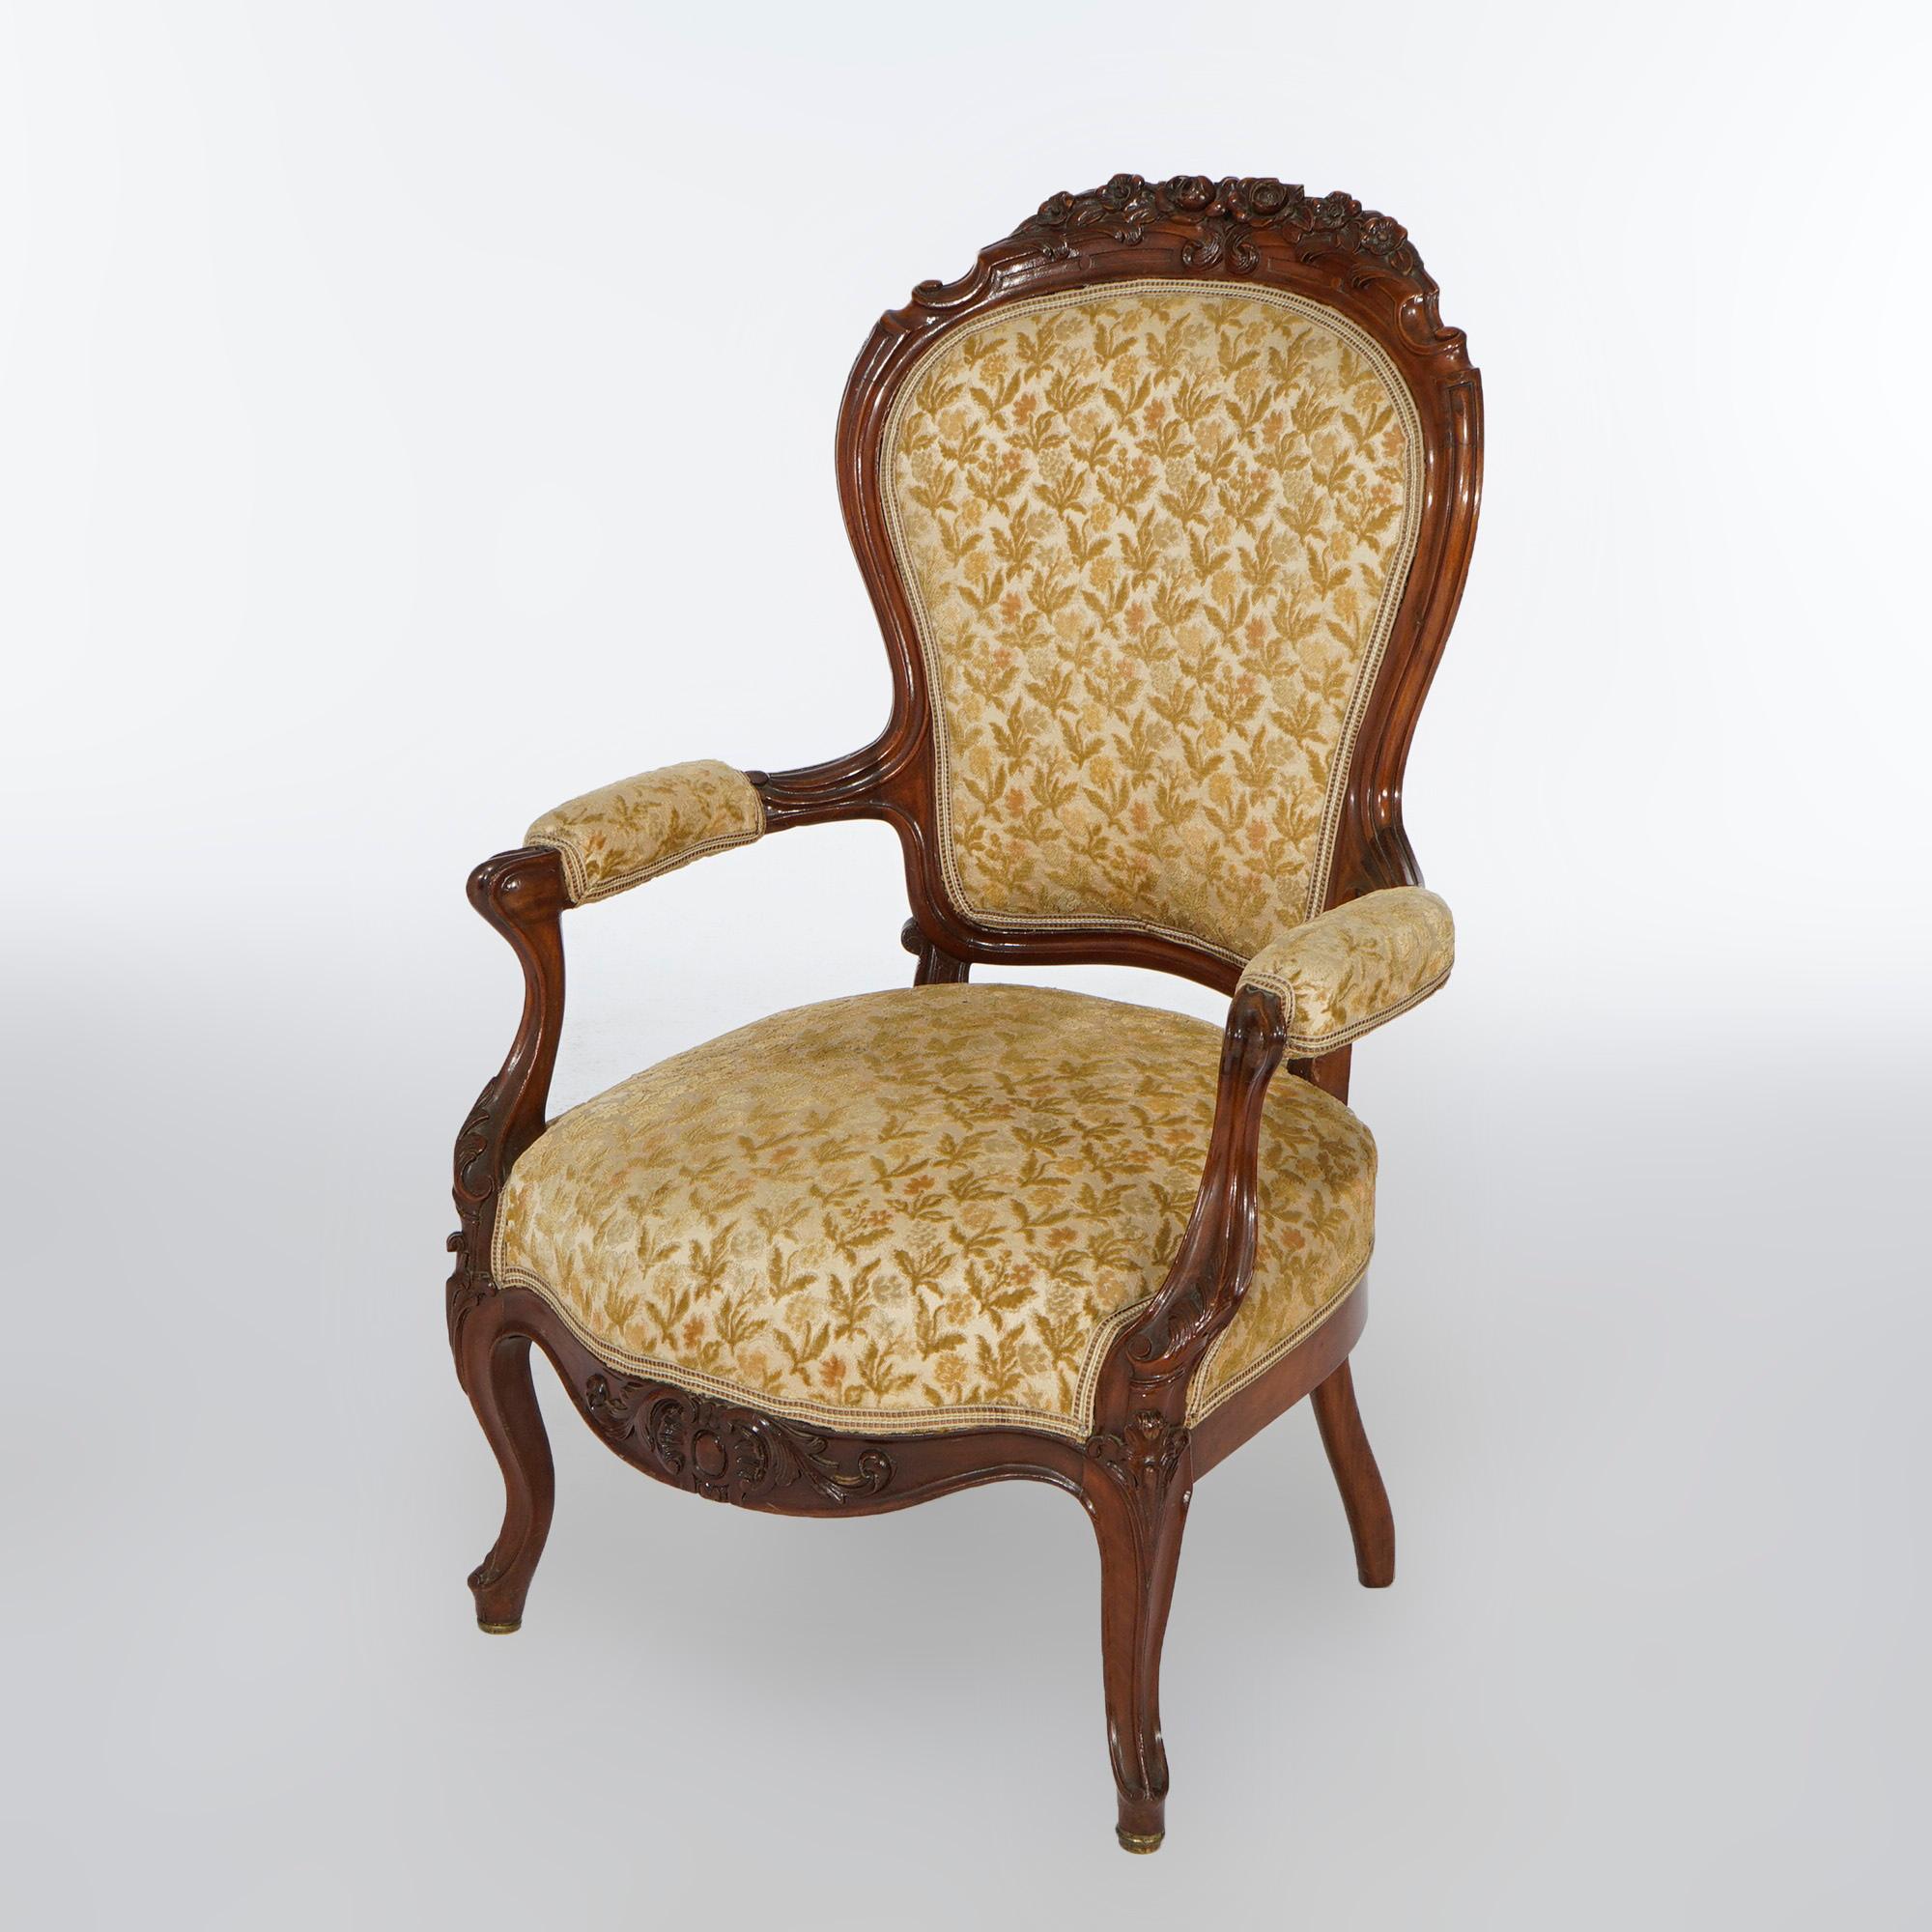 An antique Victorian parlor chair offers walnut frame with carved floral crest over upholstered back and seat, raised on cabriole legs, c1890

Measures- 41.25''H x 26.5''W x 27''D.